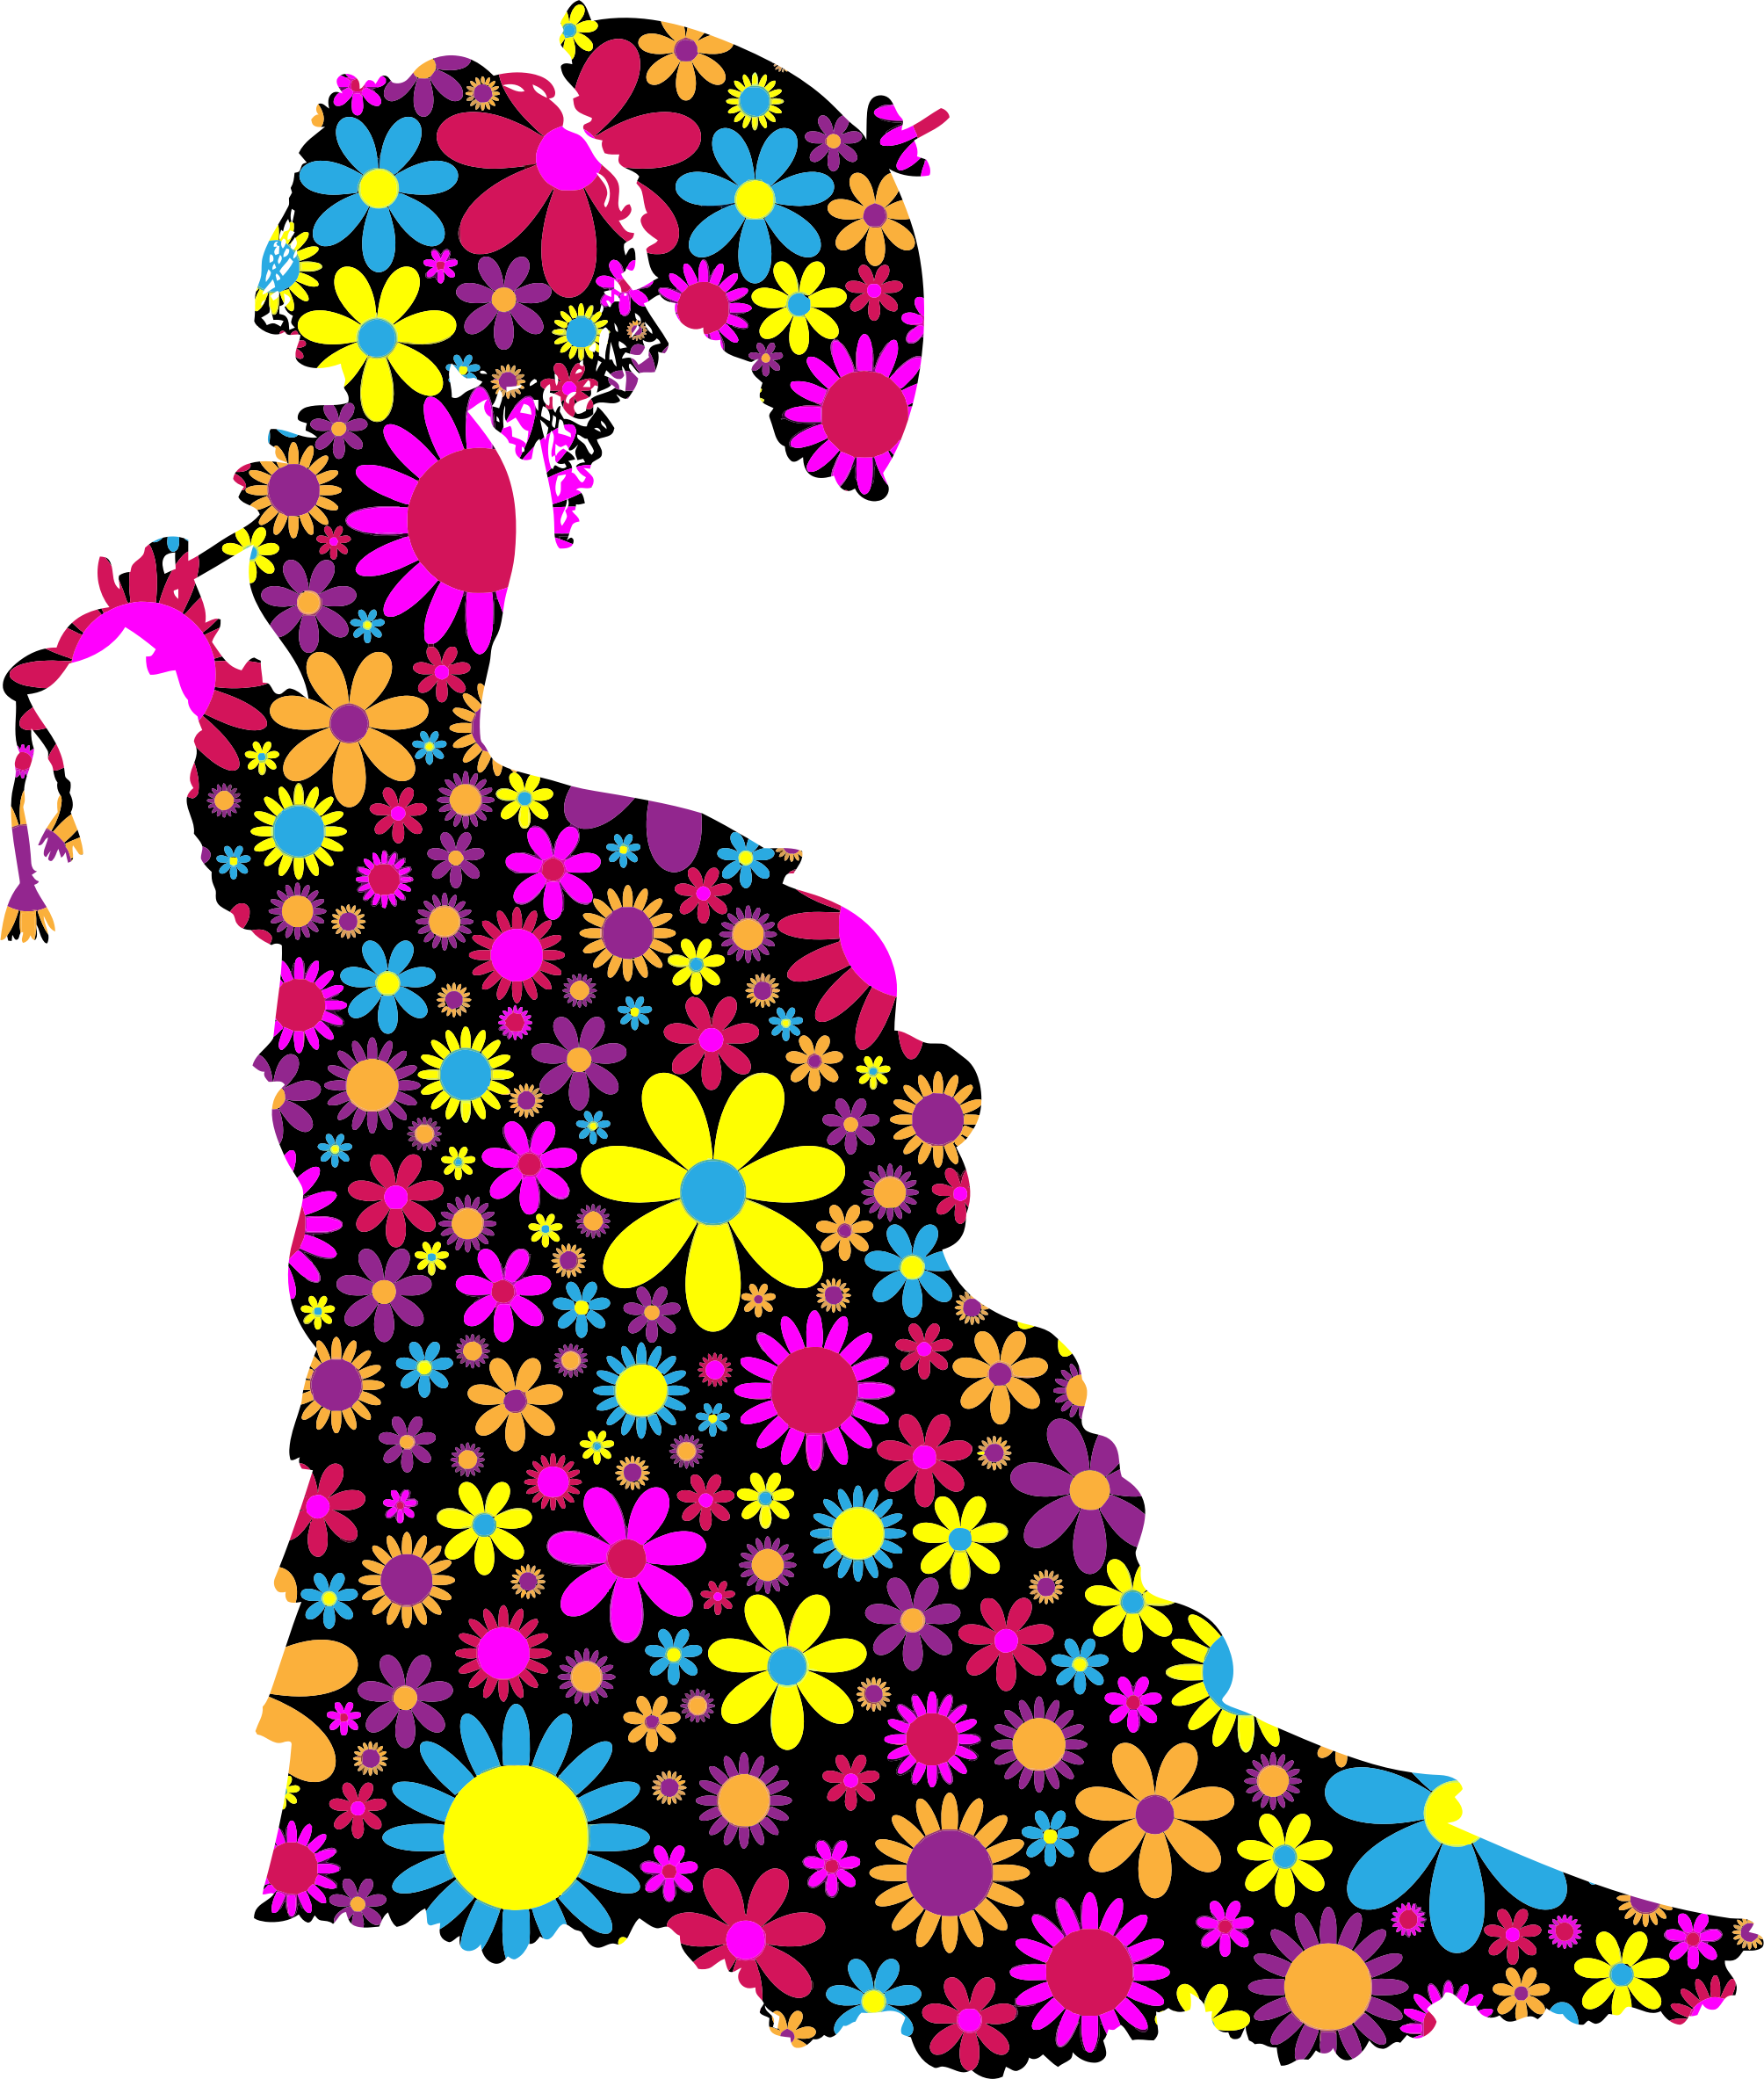 Floral Vintage Victorian Lady Silhouette By @gdj, Floral - Vintage Lady Silhouette (2008x2366)